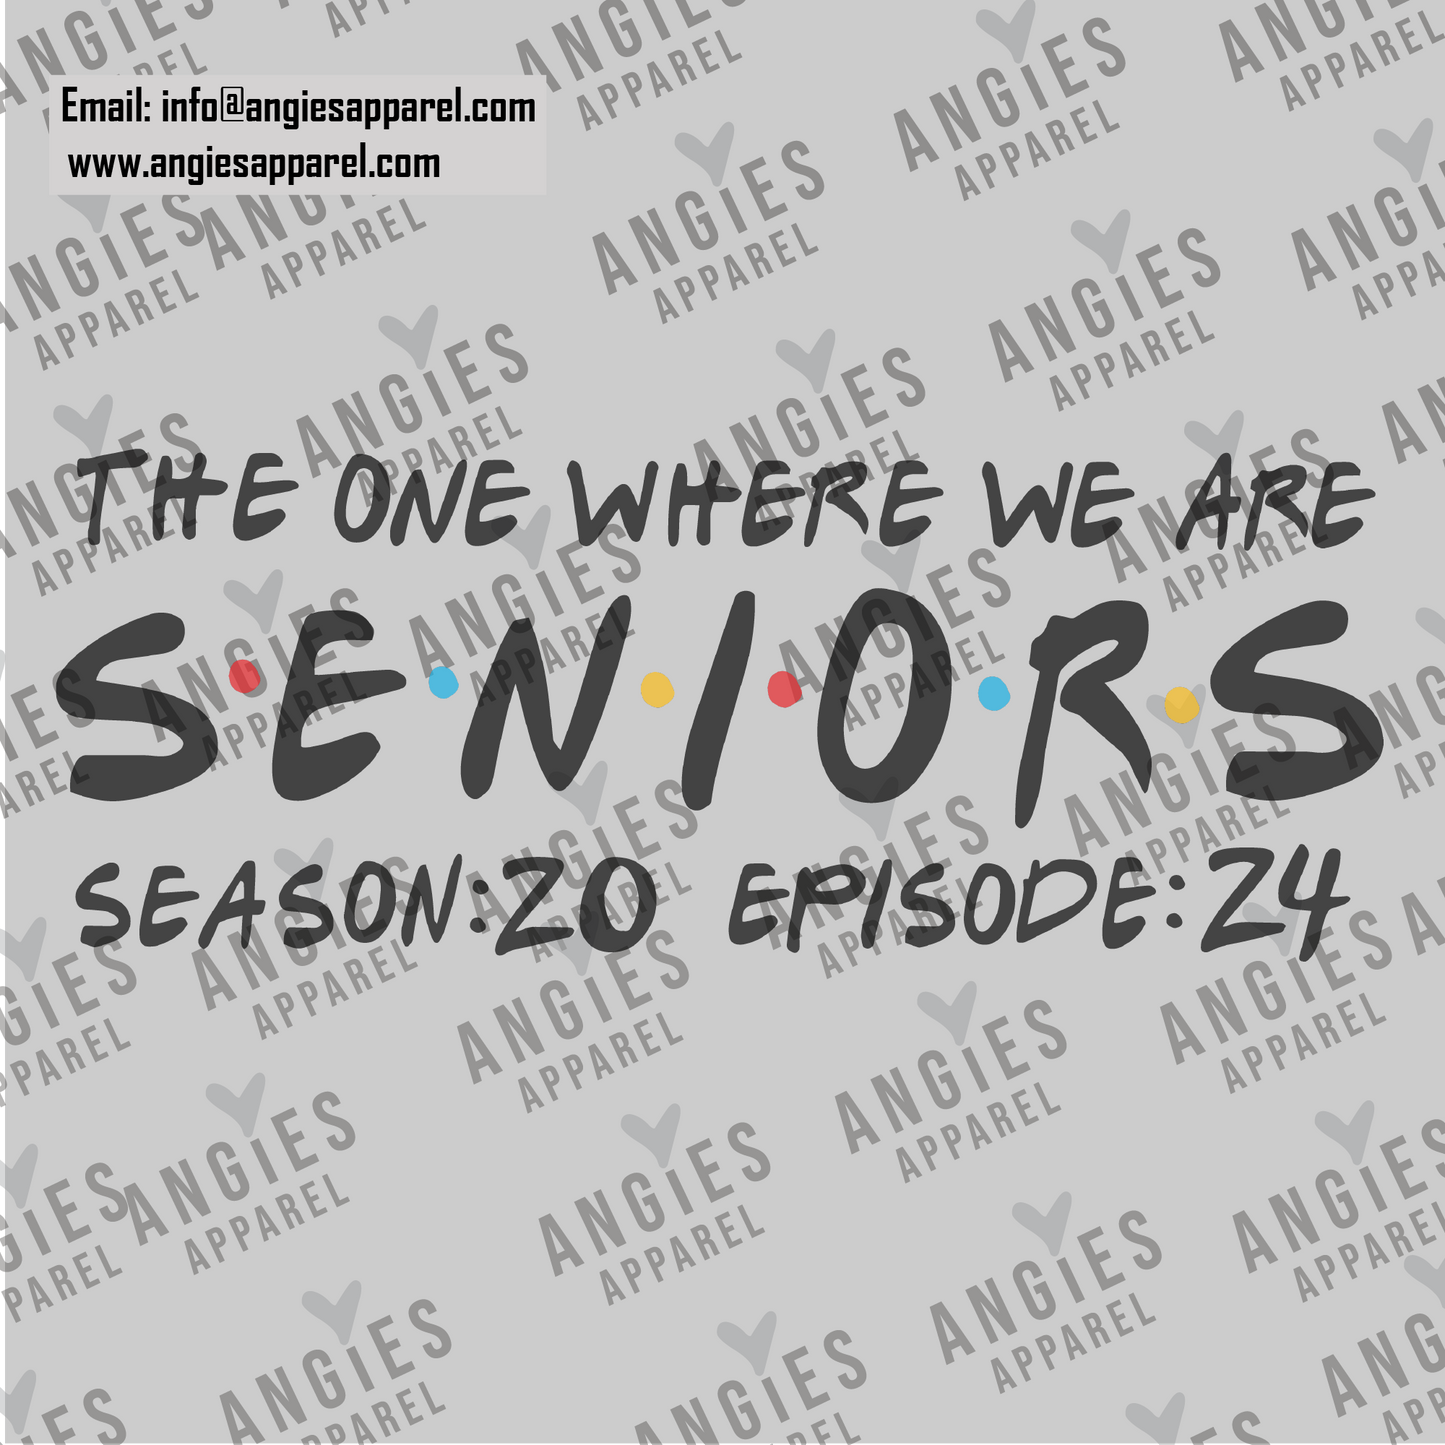 18.seniors the one when we are season 20 episode 24